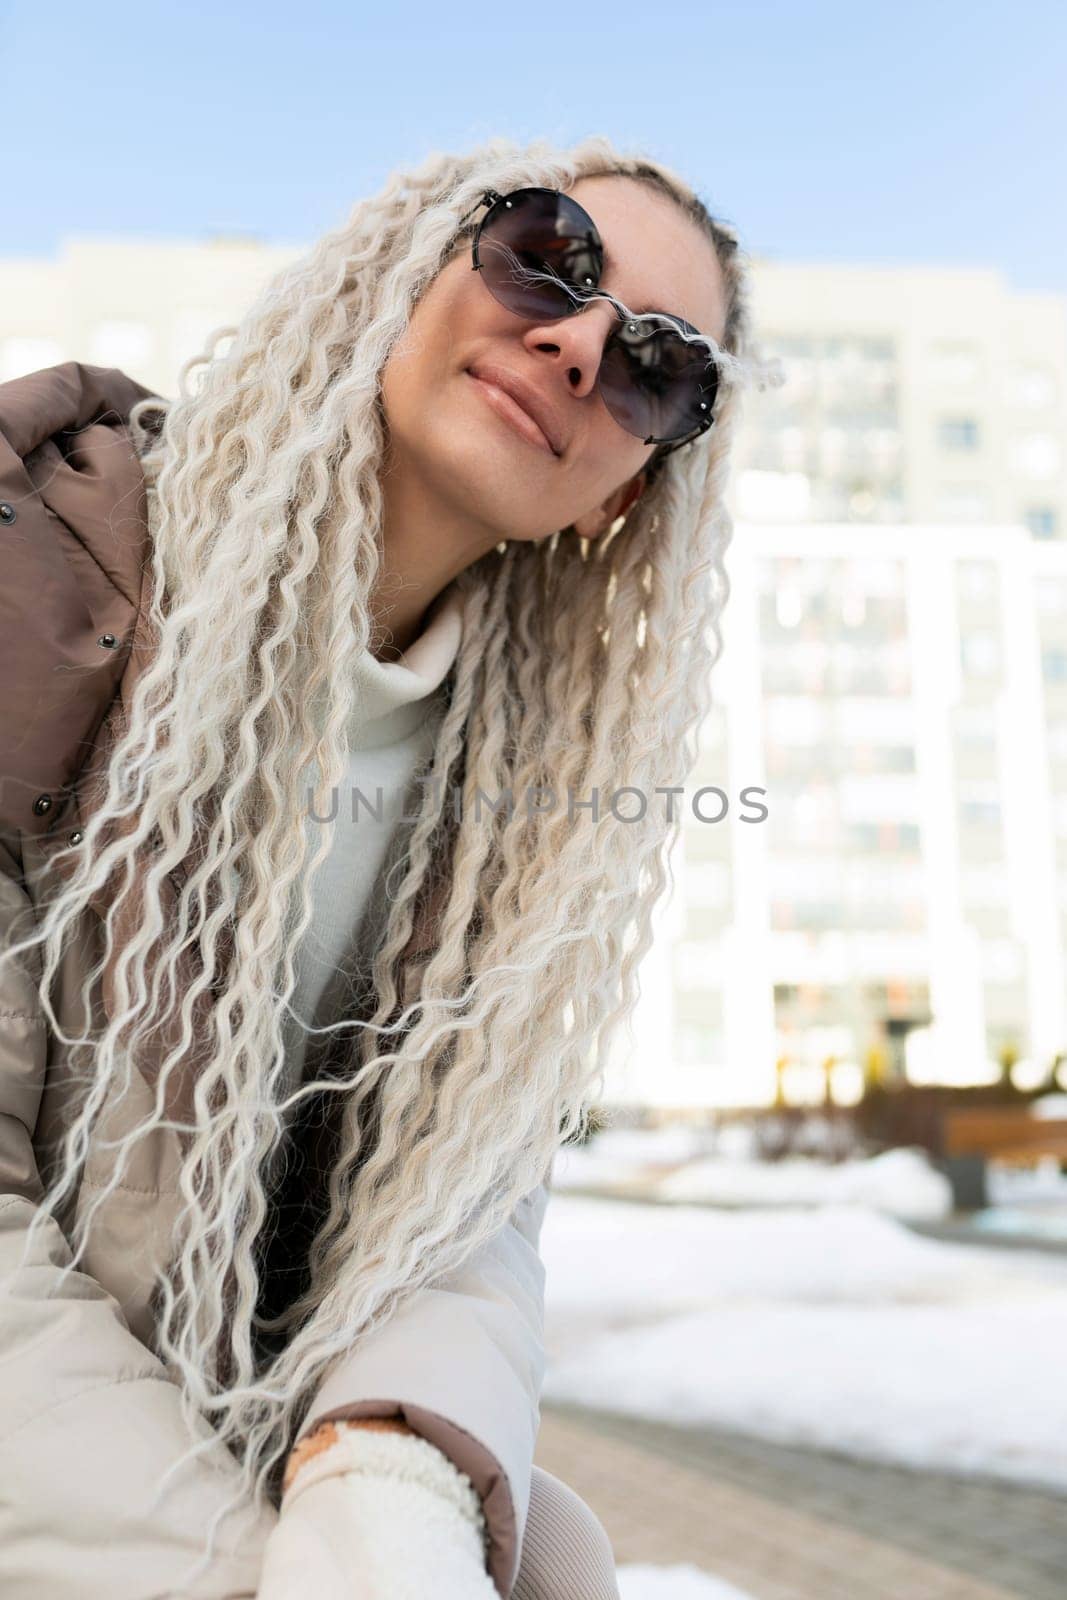 Woman With Long Blonde Hair and Sunglasses by TRMK